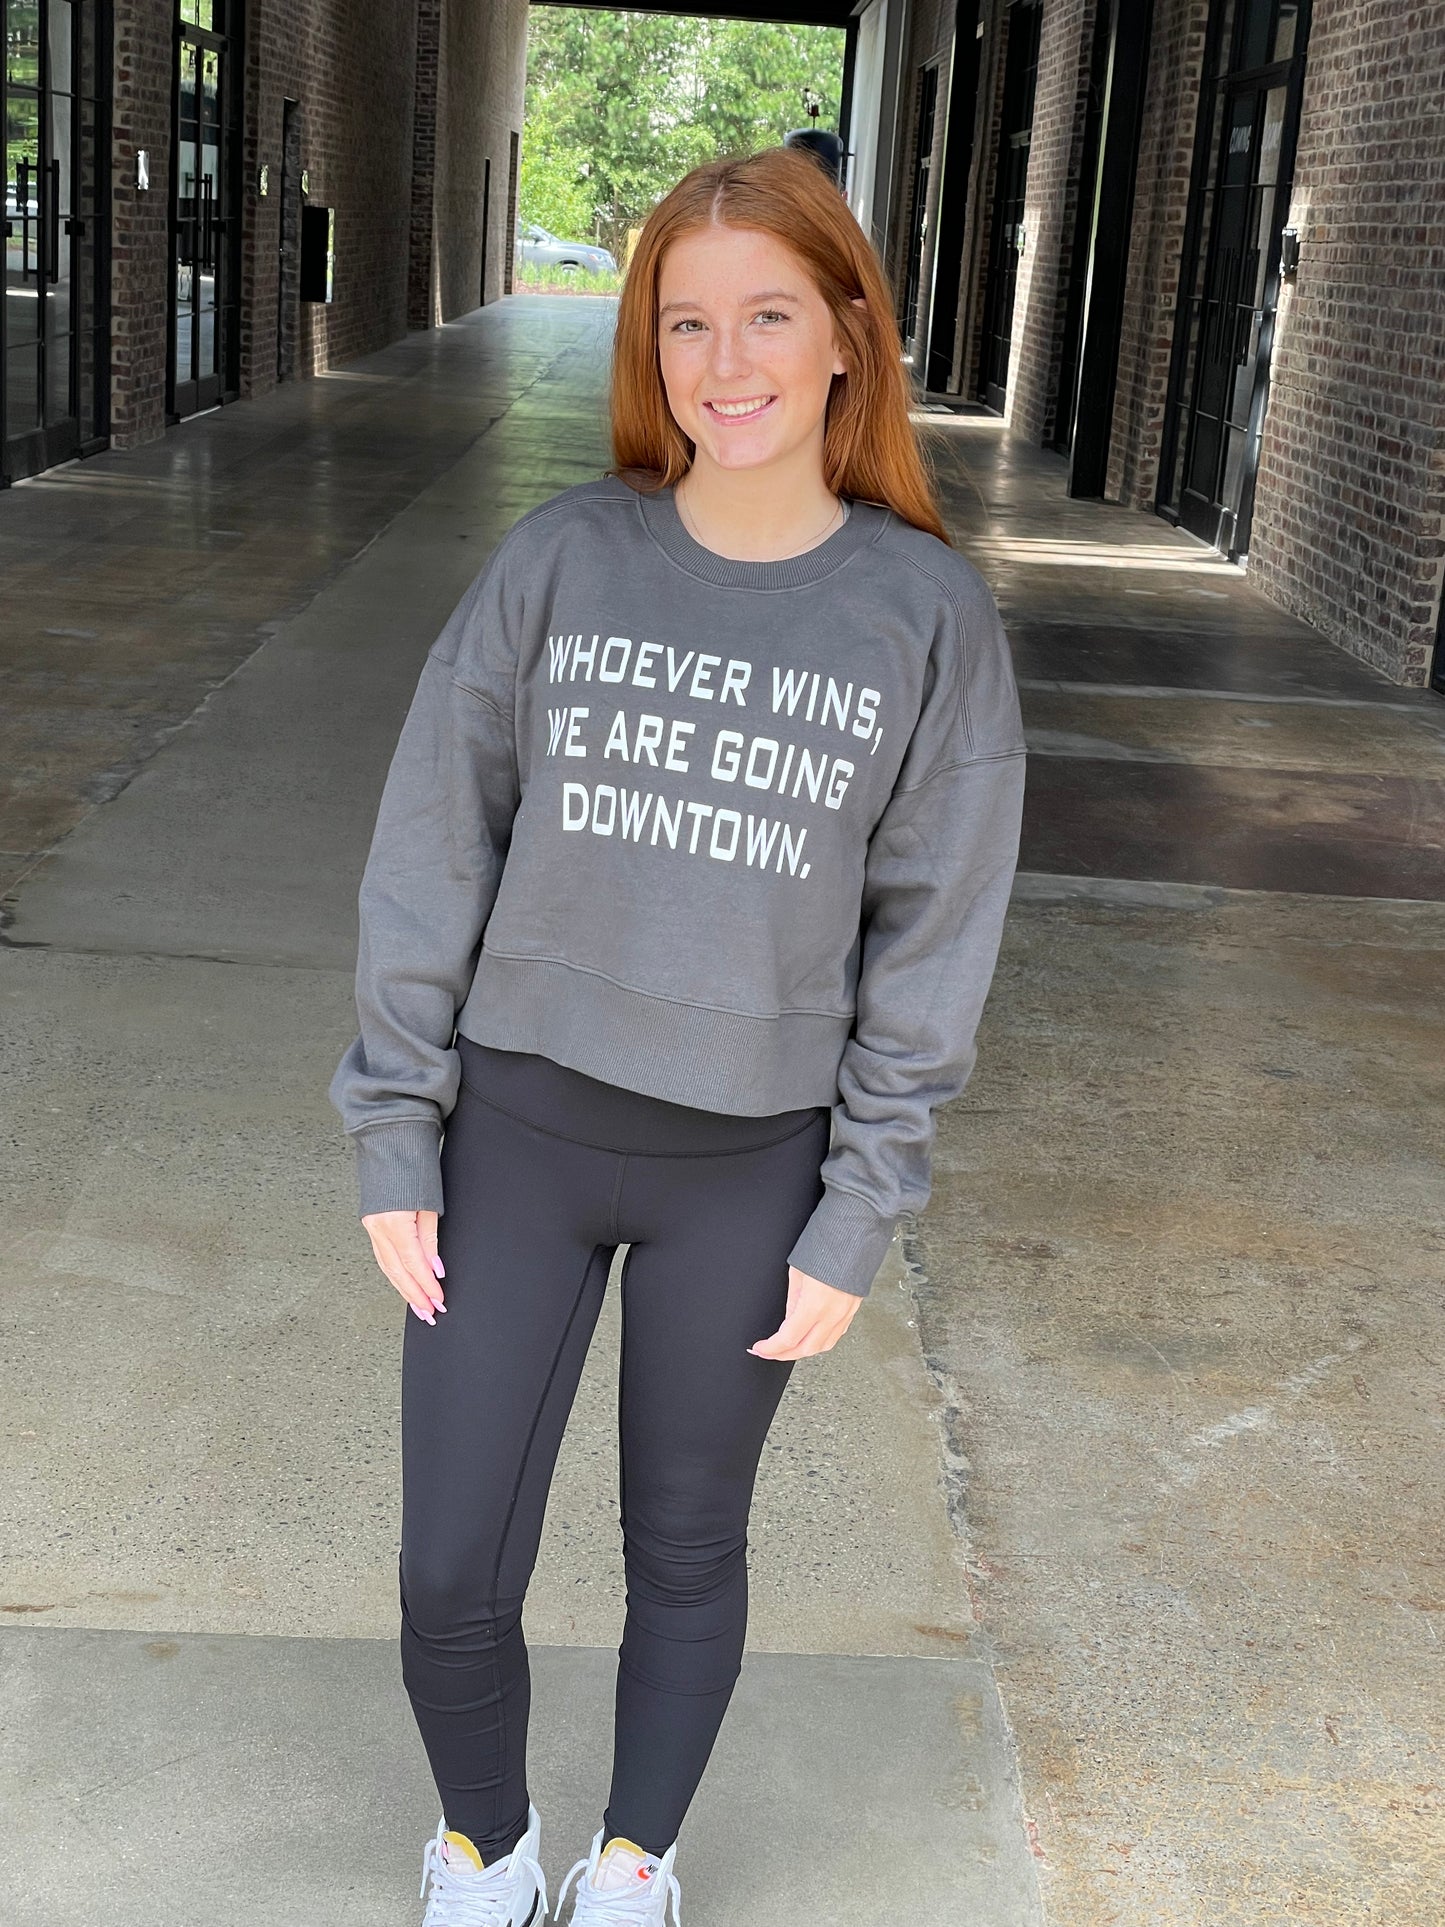 Whoever wins, we are going downtown sweatshirt